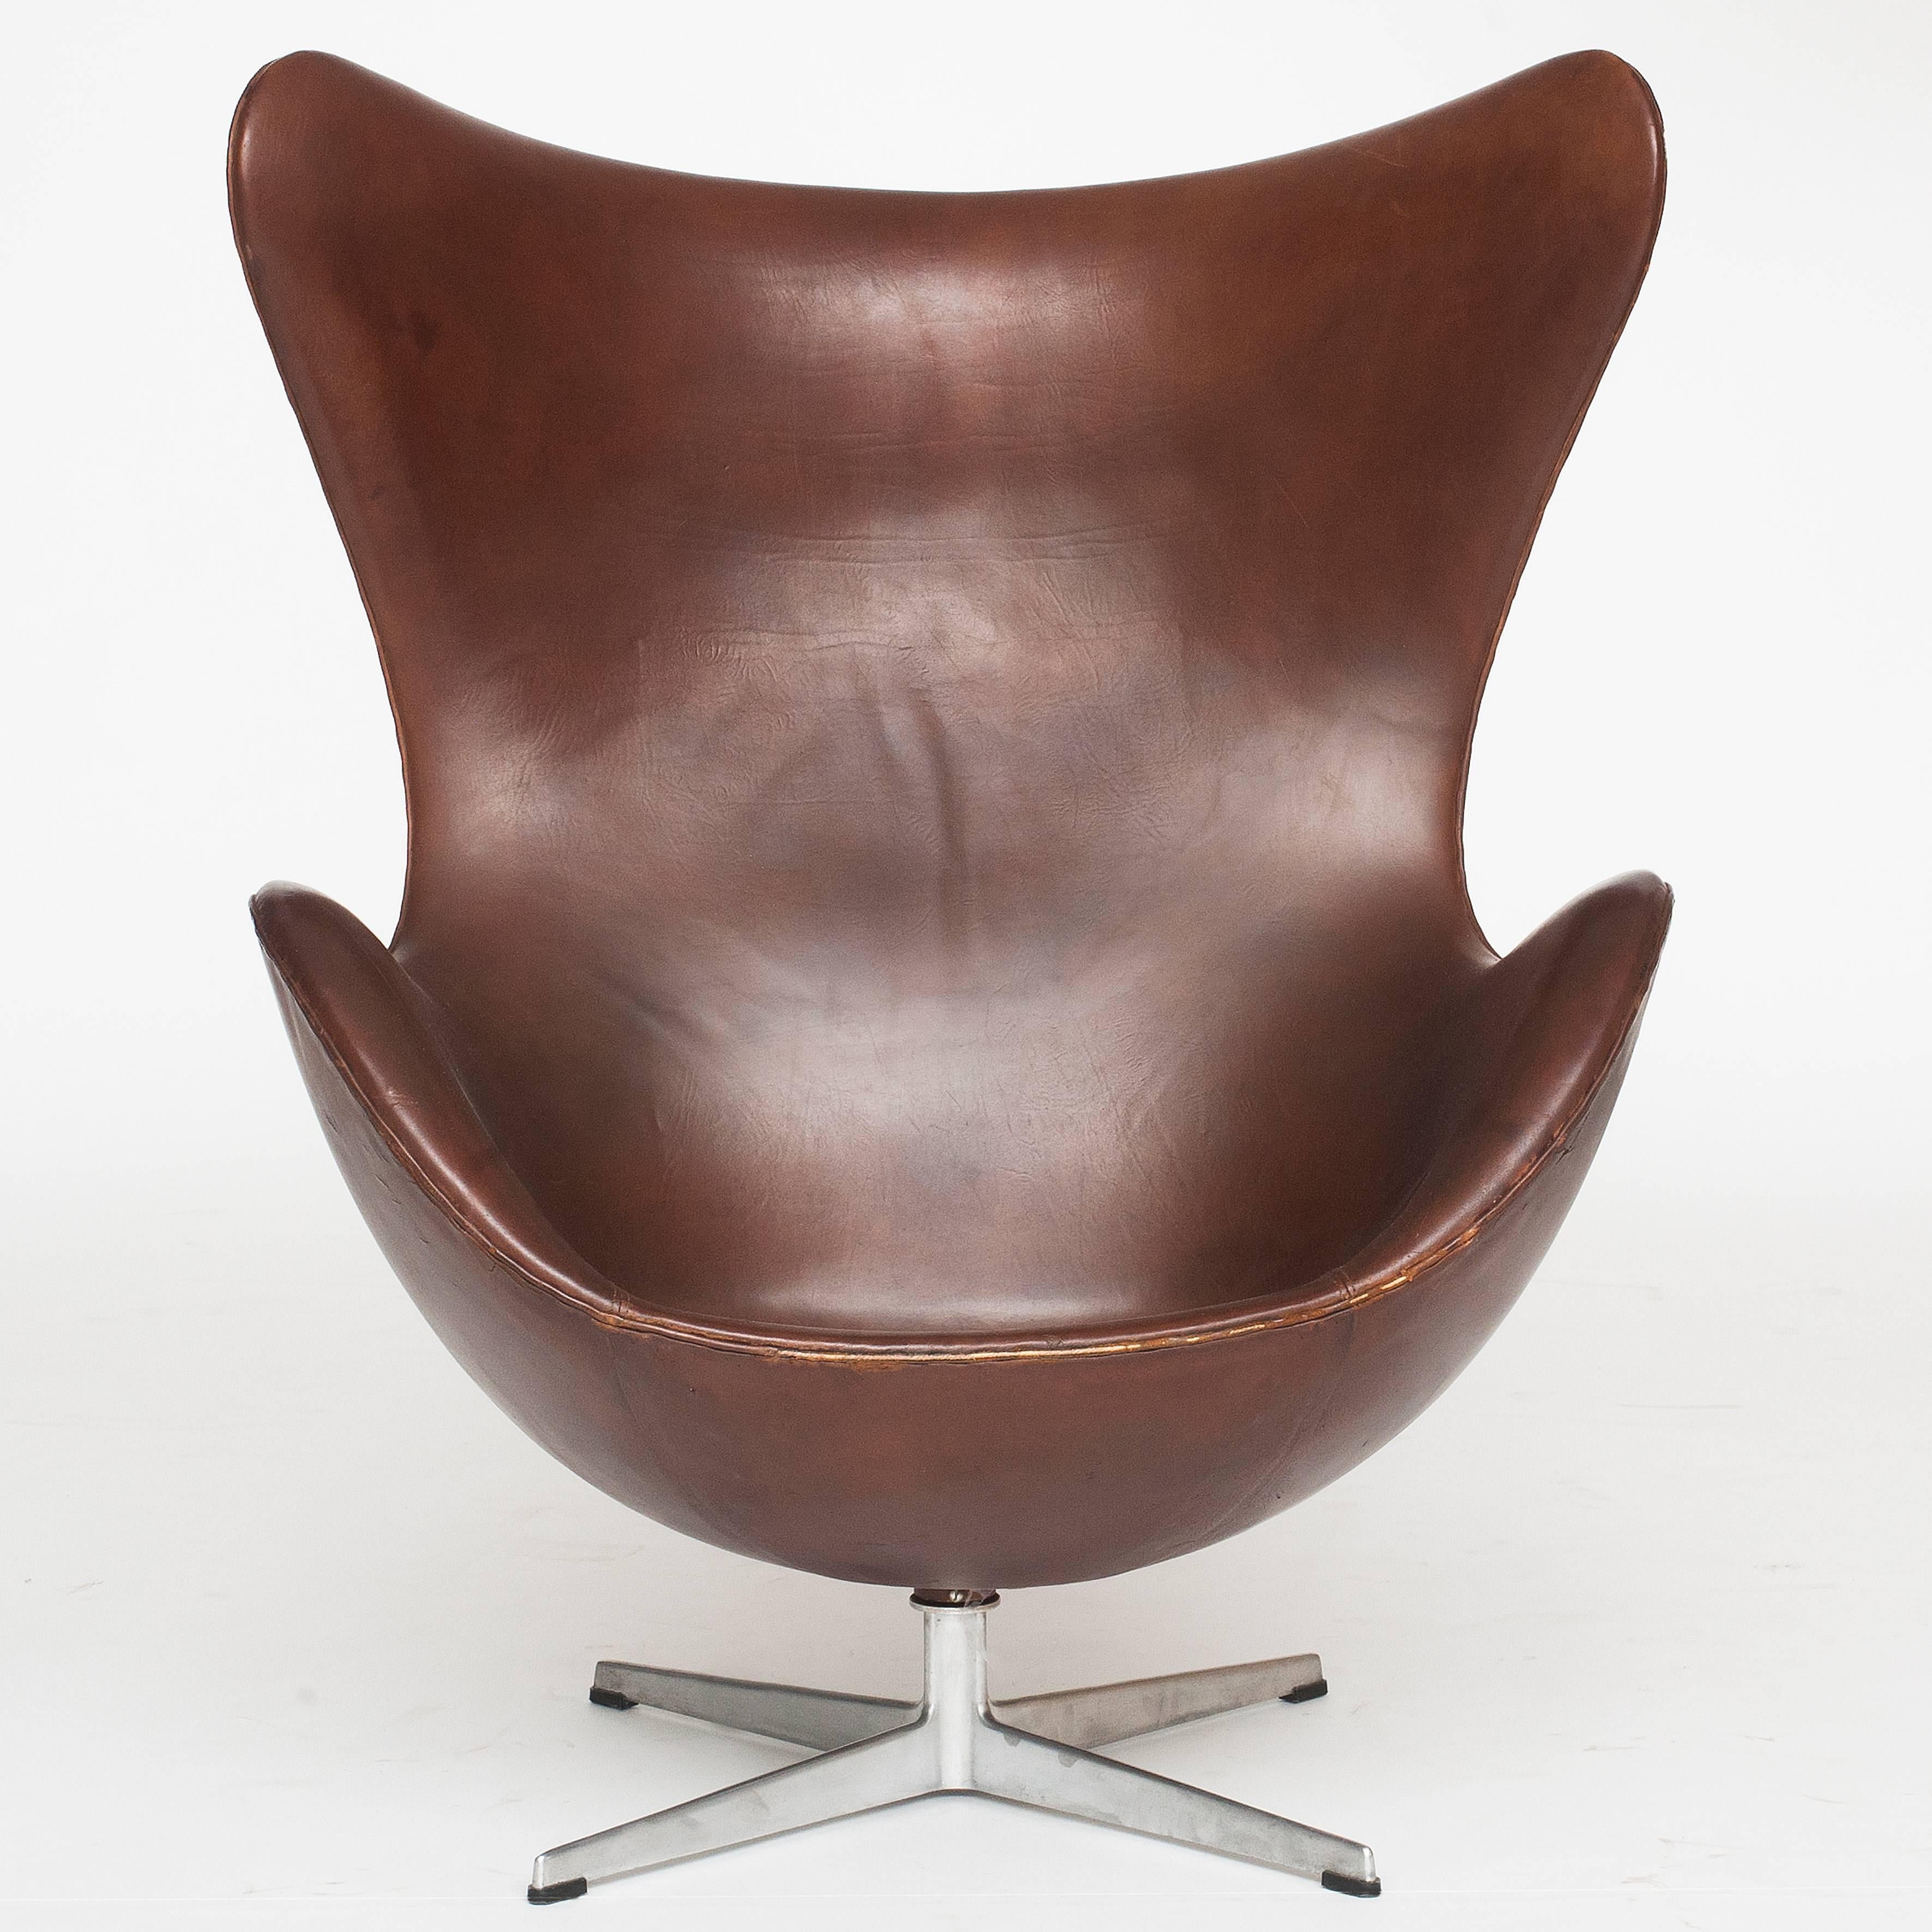 AJ 3316 Egg chair with original red/brown leather. Rare model, not including the upholstery of more recent date. designed for the SAS Royal Hotel in Copenhagen.